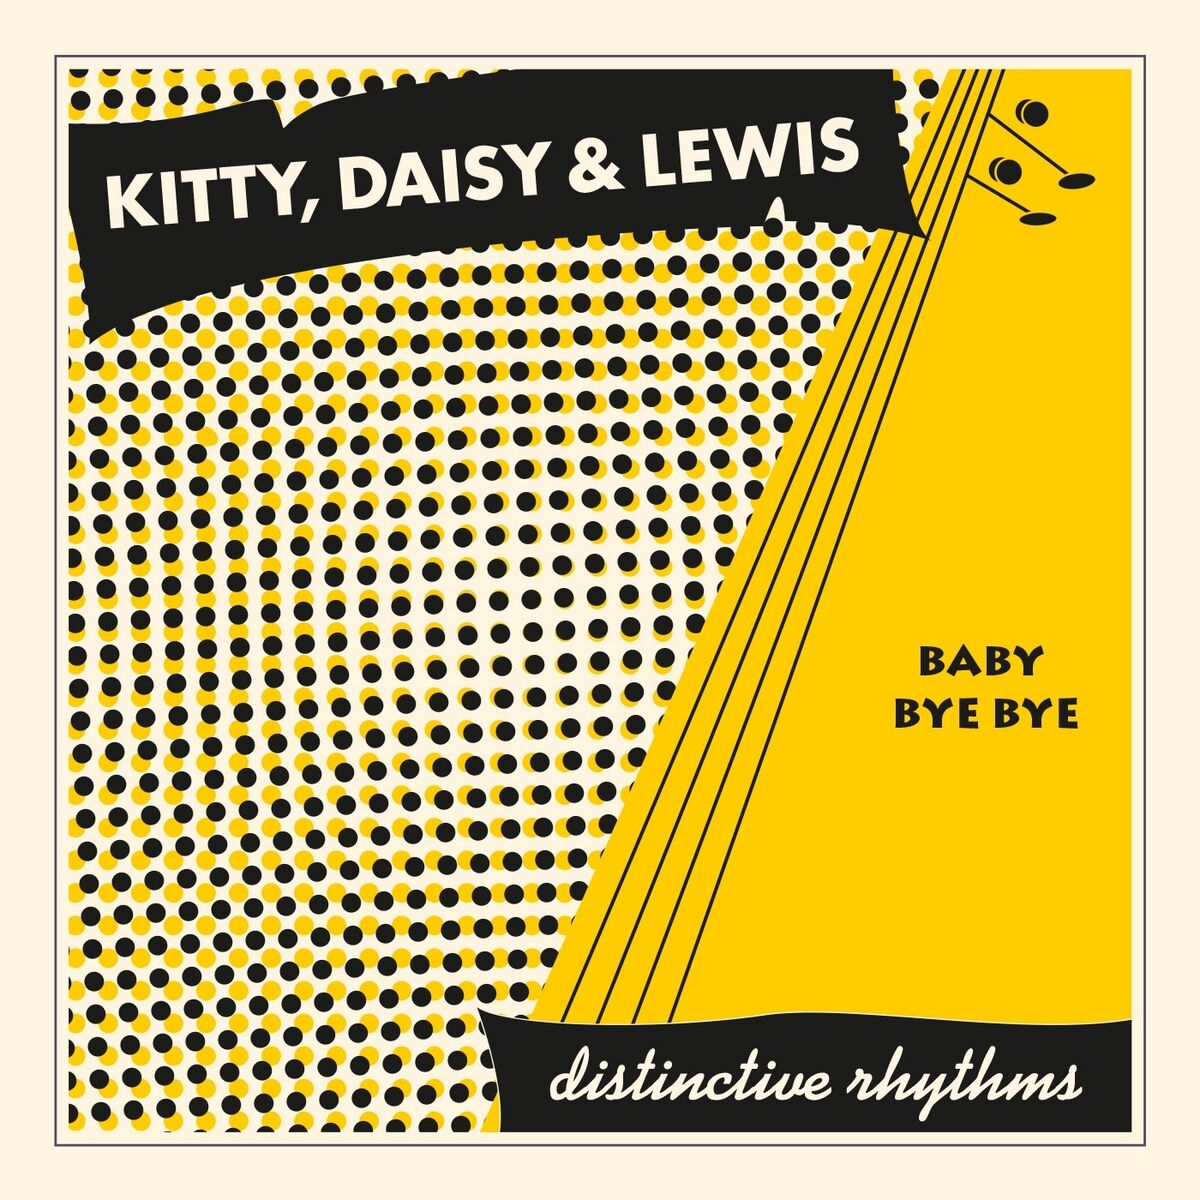 Kitty, Daisy & Lewis: albums, songs, playlists | Listen on Deezer